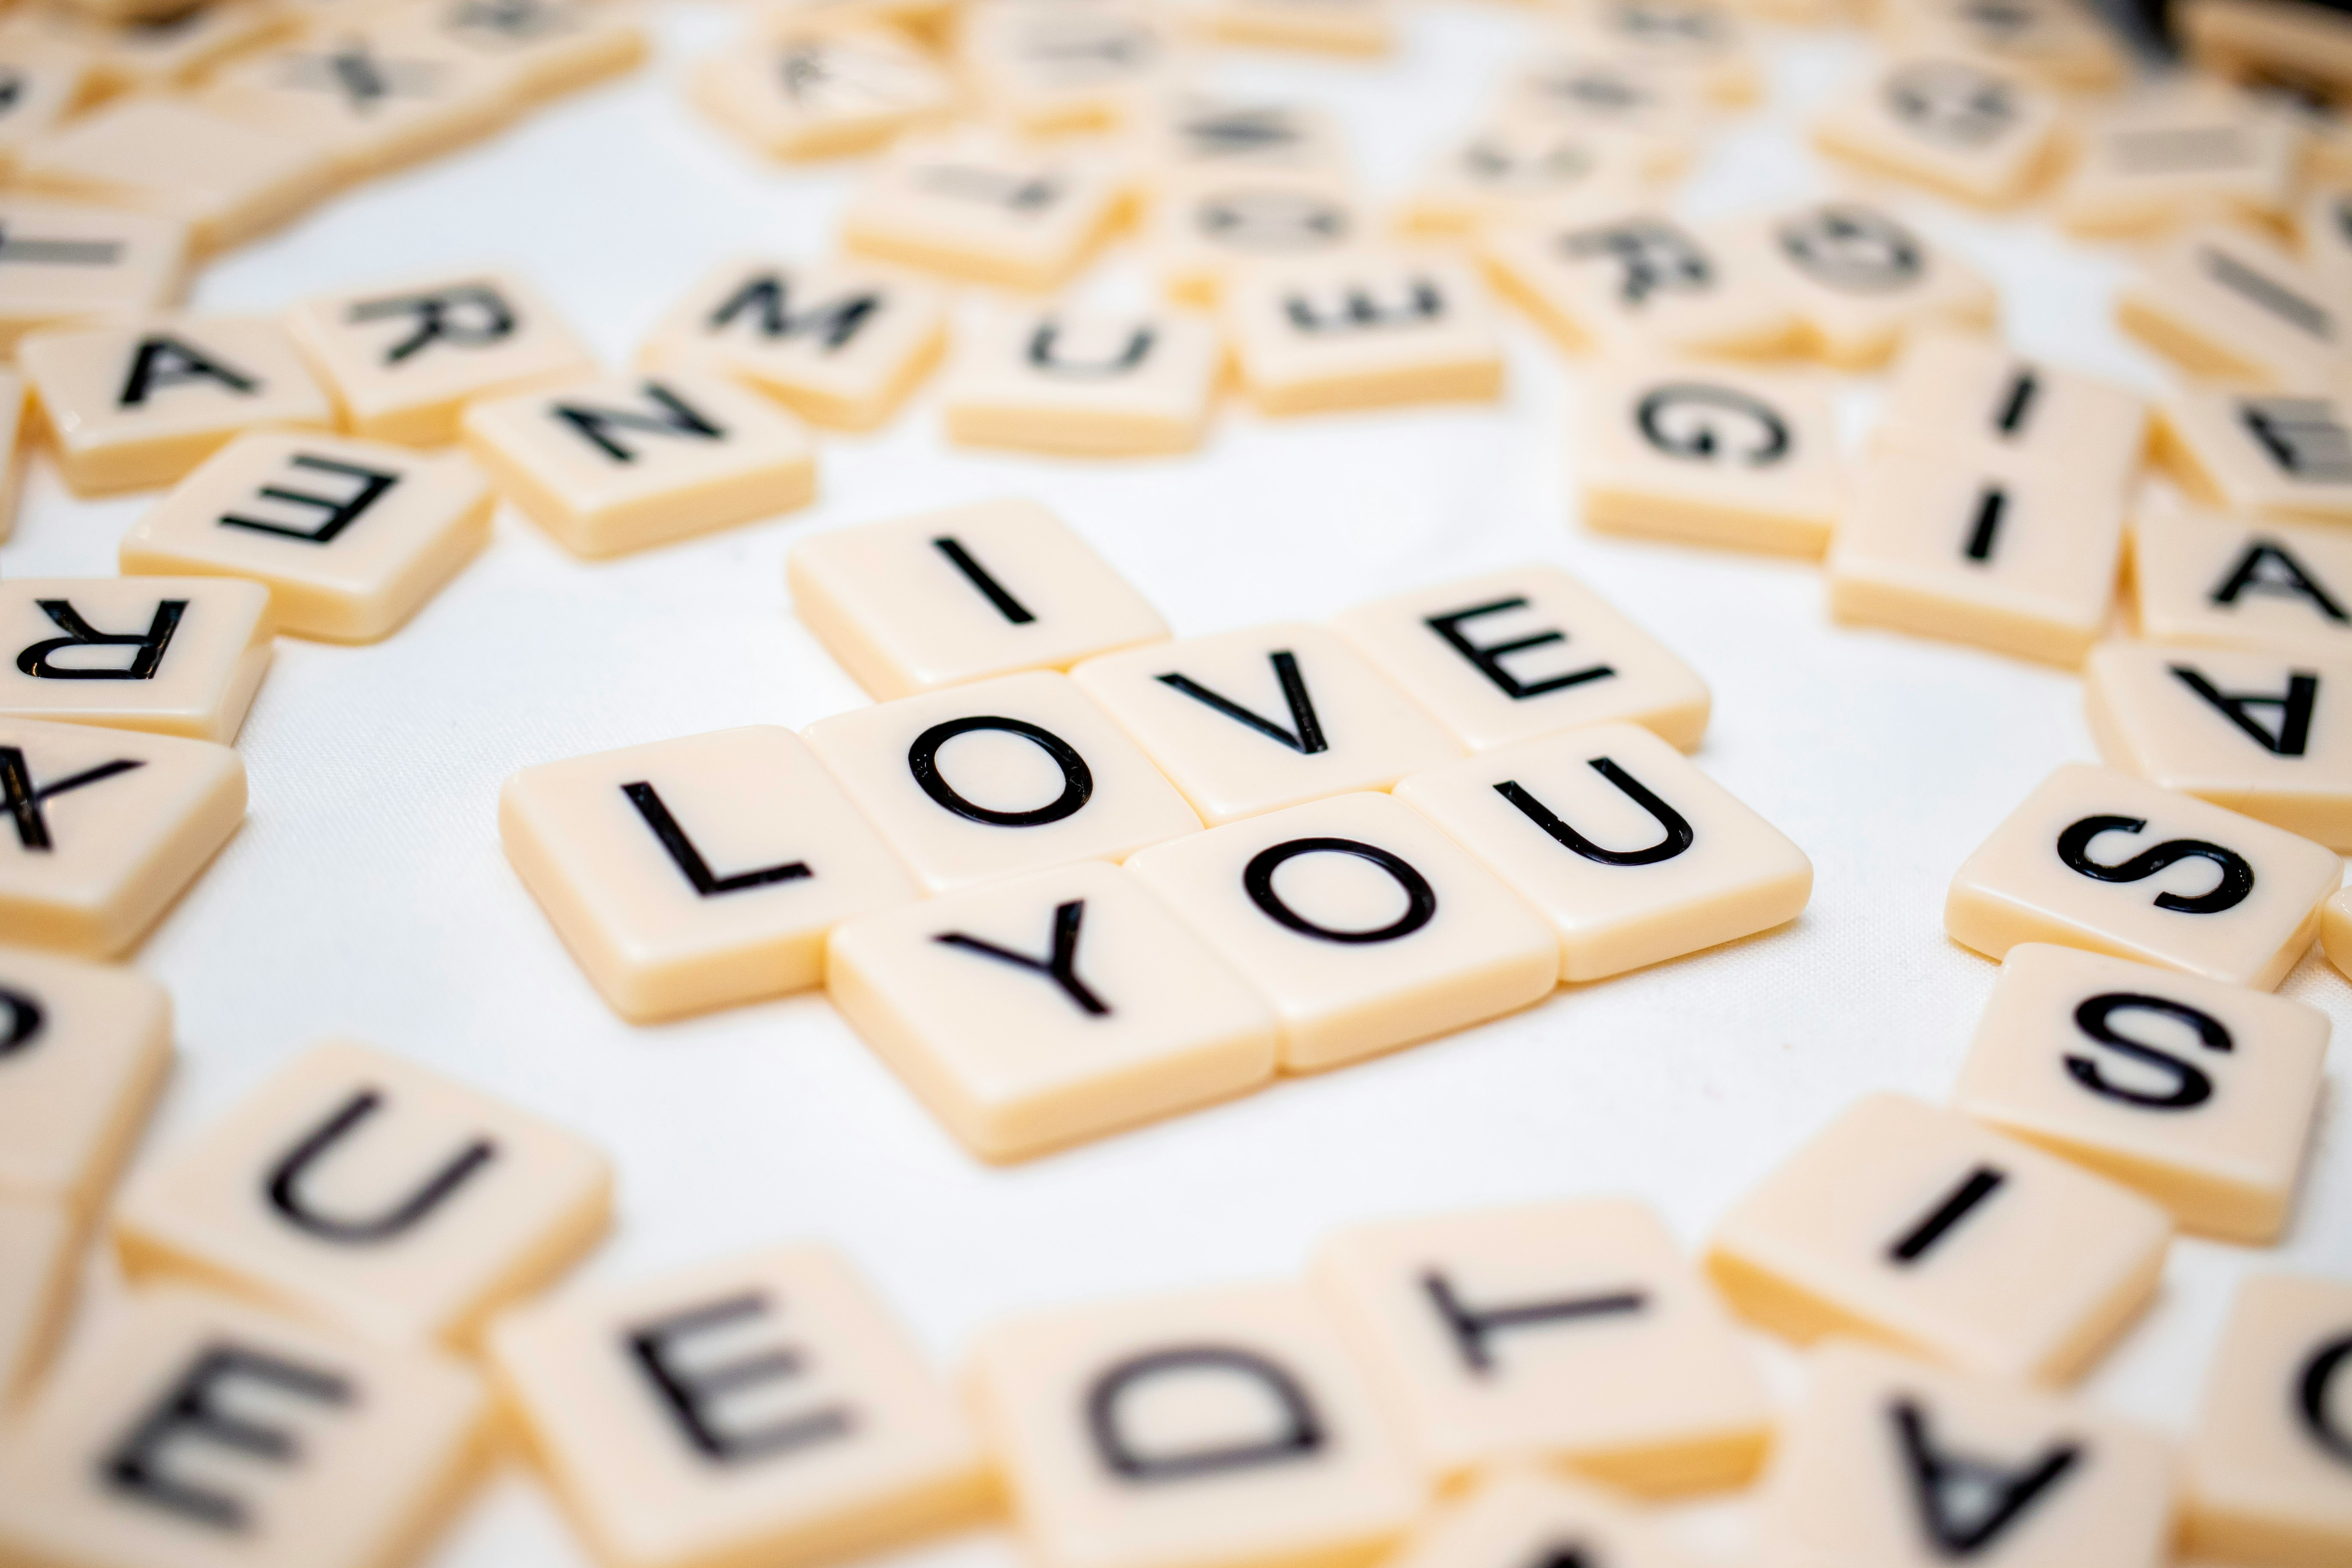 Macro photo of "I love you" spelt in letter tiles on a white background, surrounded by scattered files. 